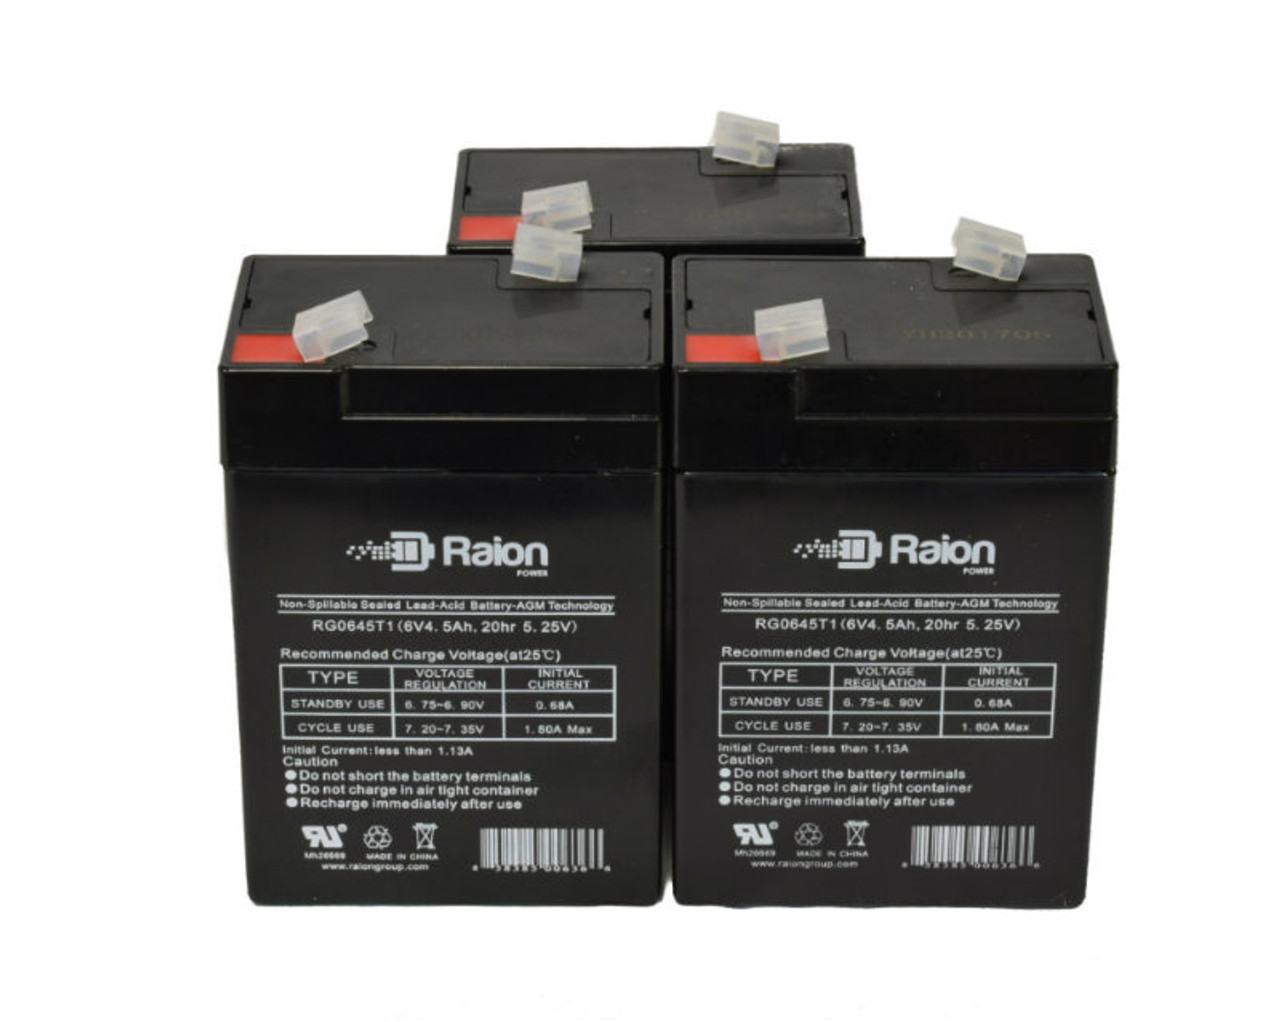 Raion Power 6V 4.5Ah Replacement Emergency Light Battery for Detex ECL230MD - 3 Pack